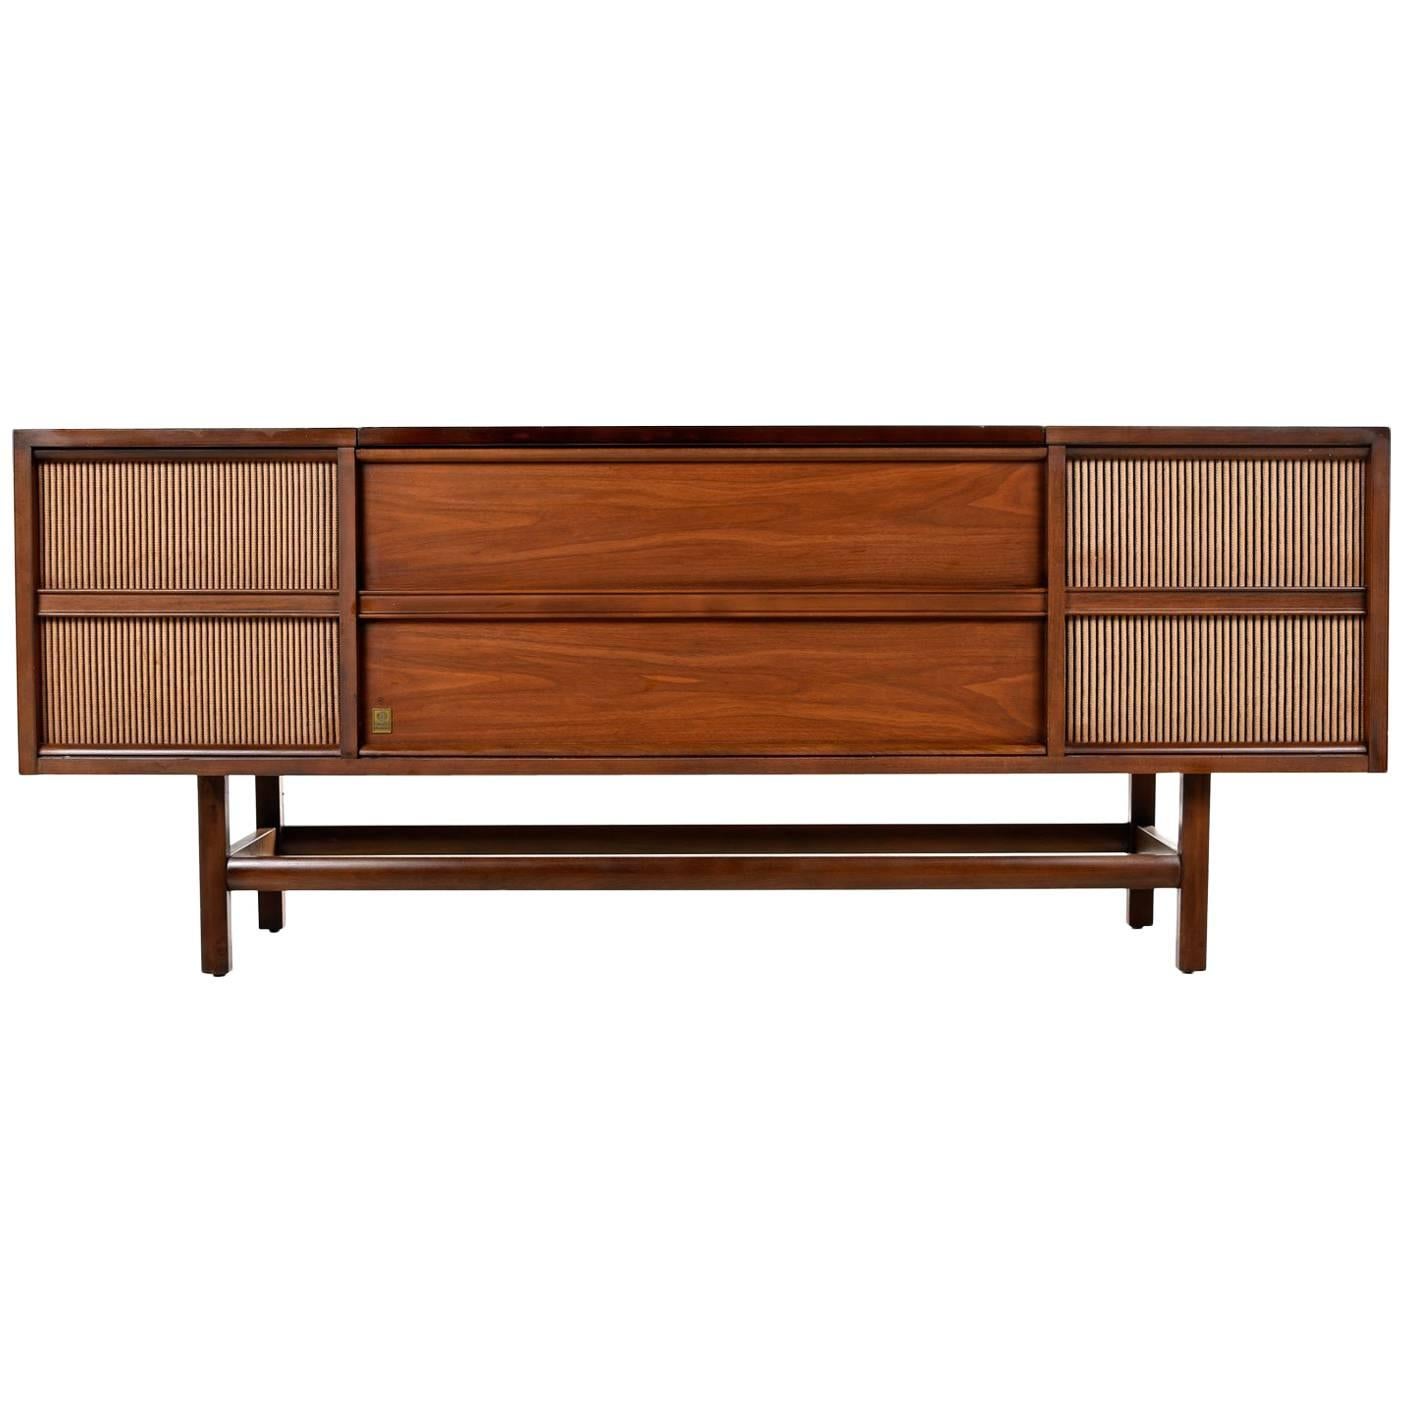 Danish Walnut Credenza Style GE Console Tubed Stereo, Fully Serviced and Working